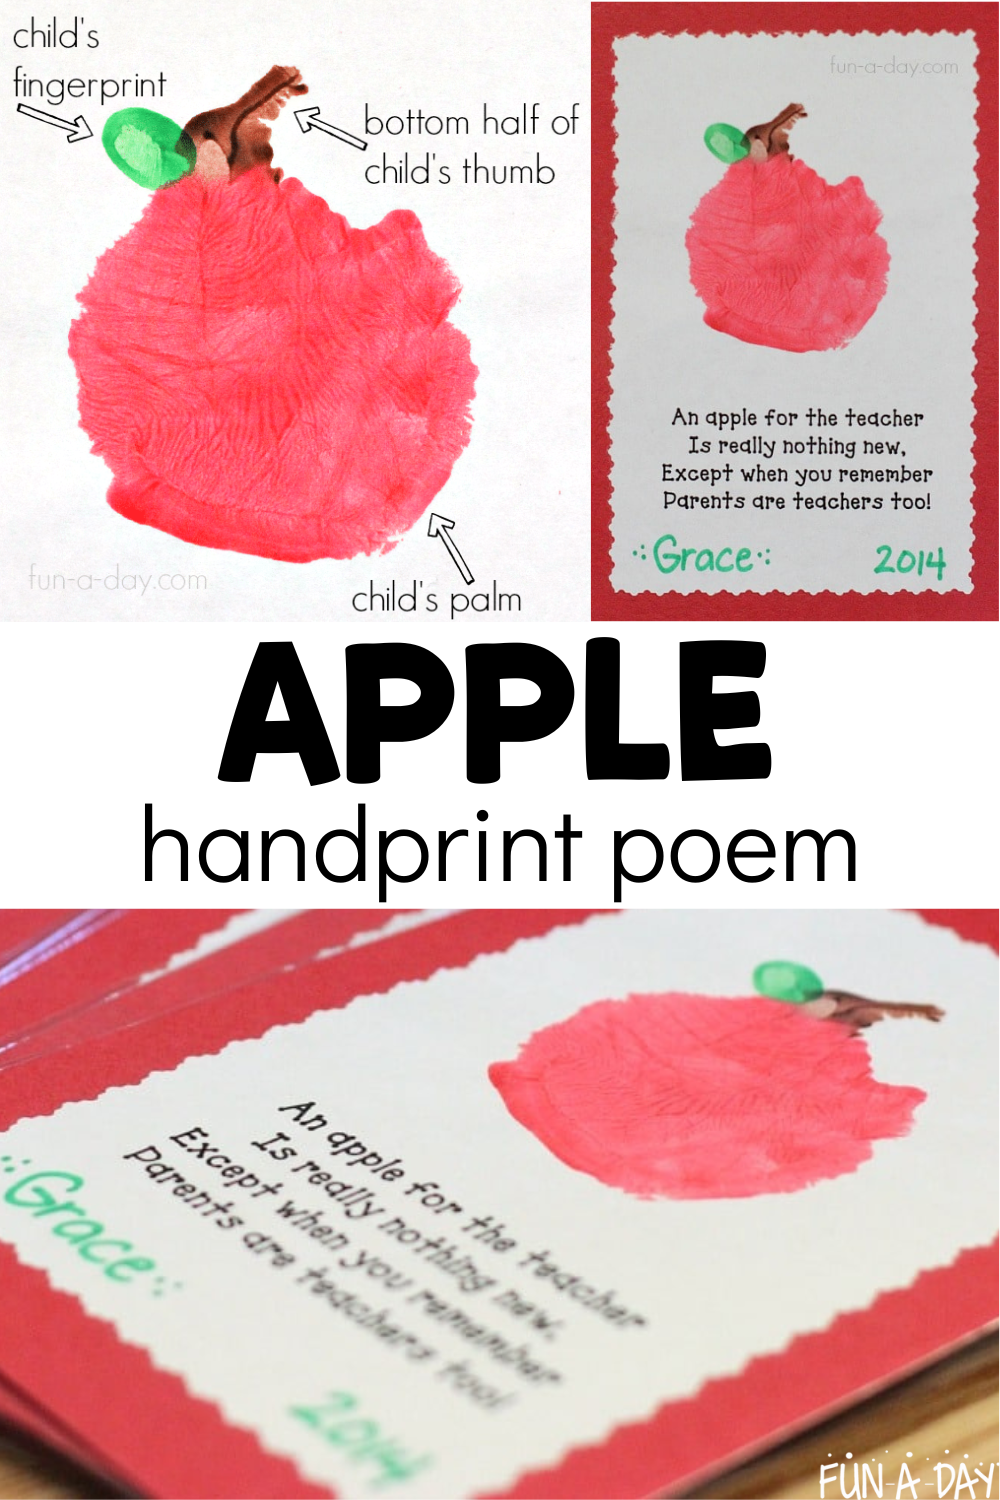 preschool hand print art used as gift with text that reads apple handprint poem